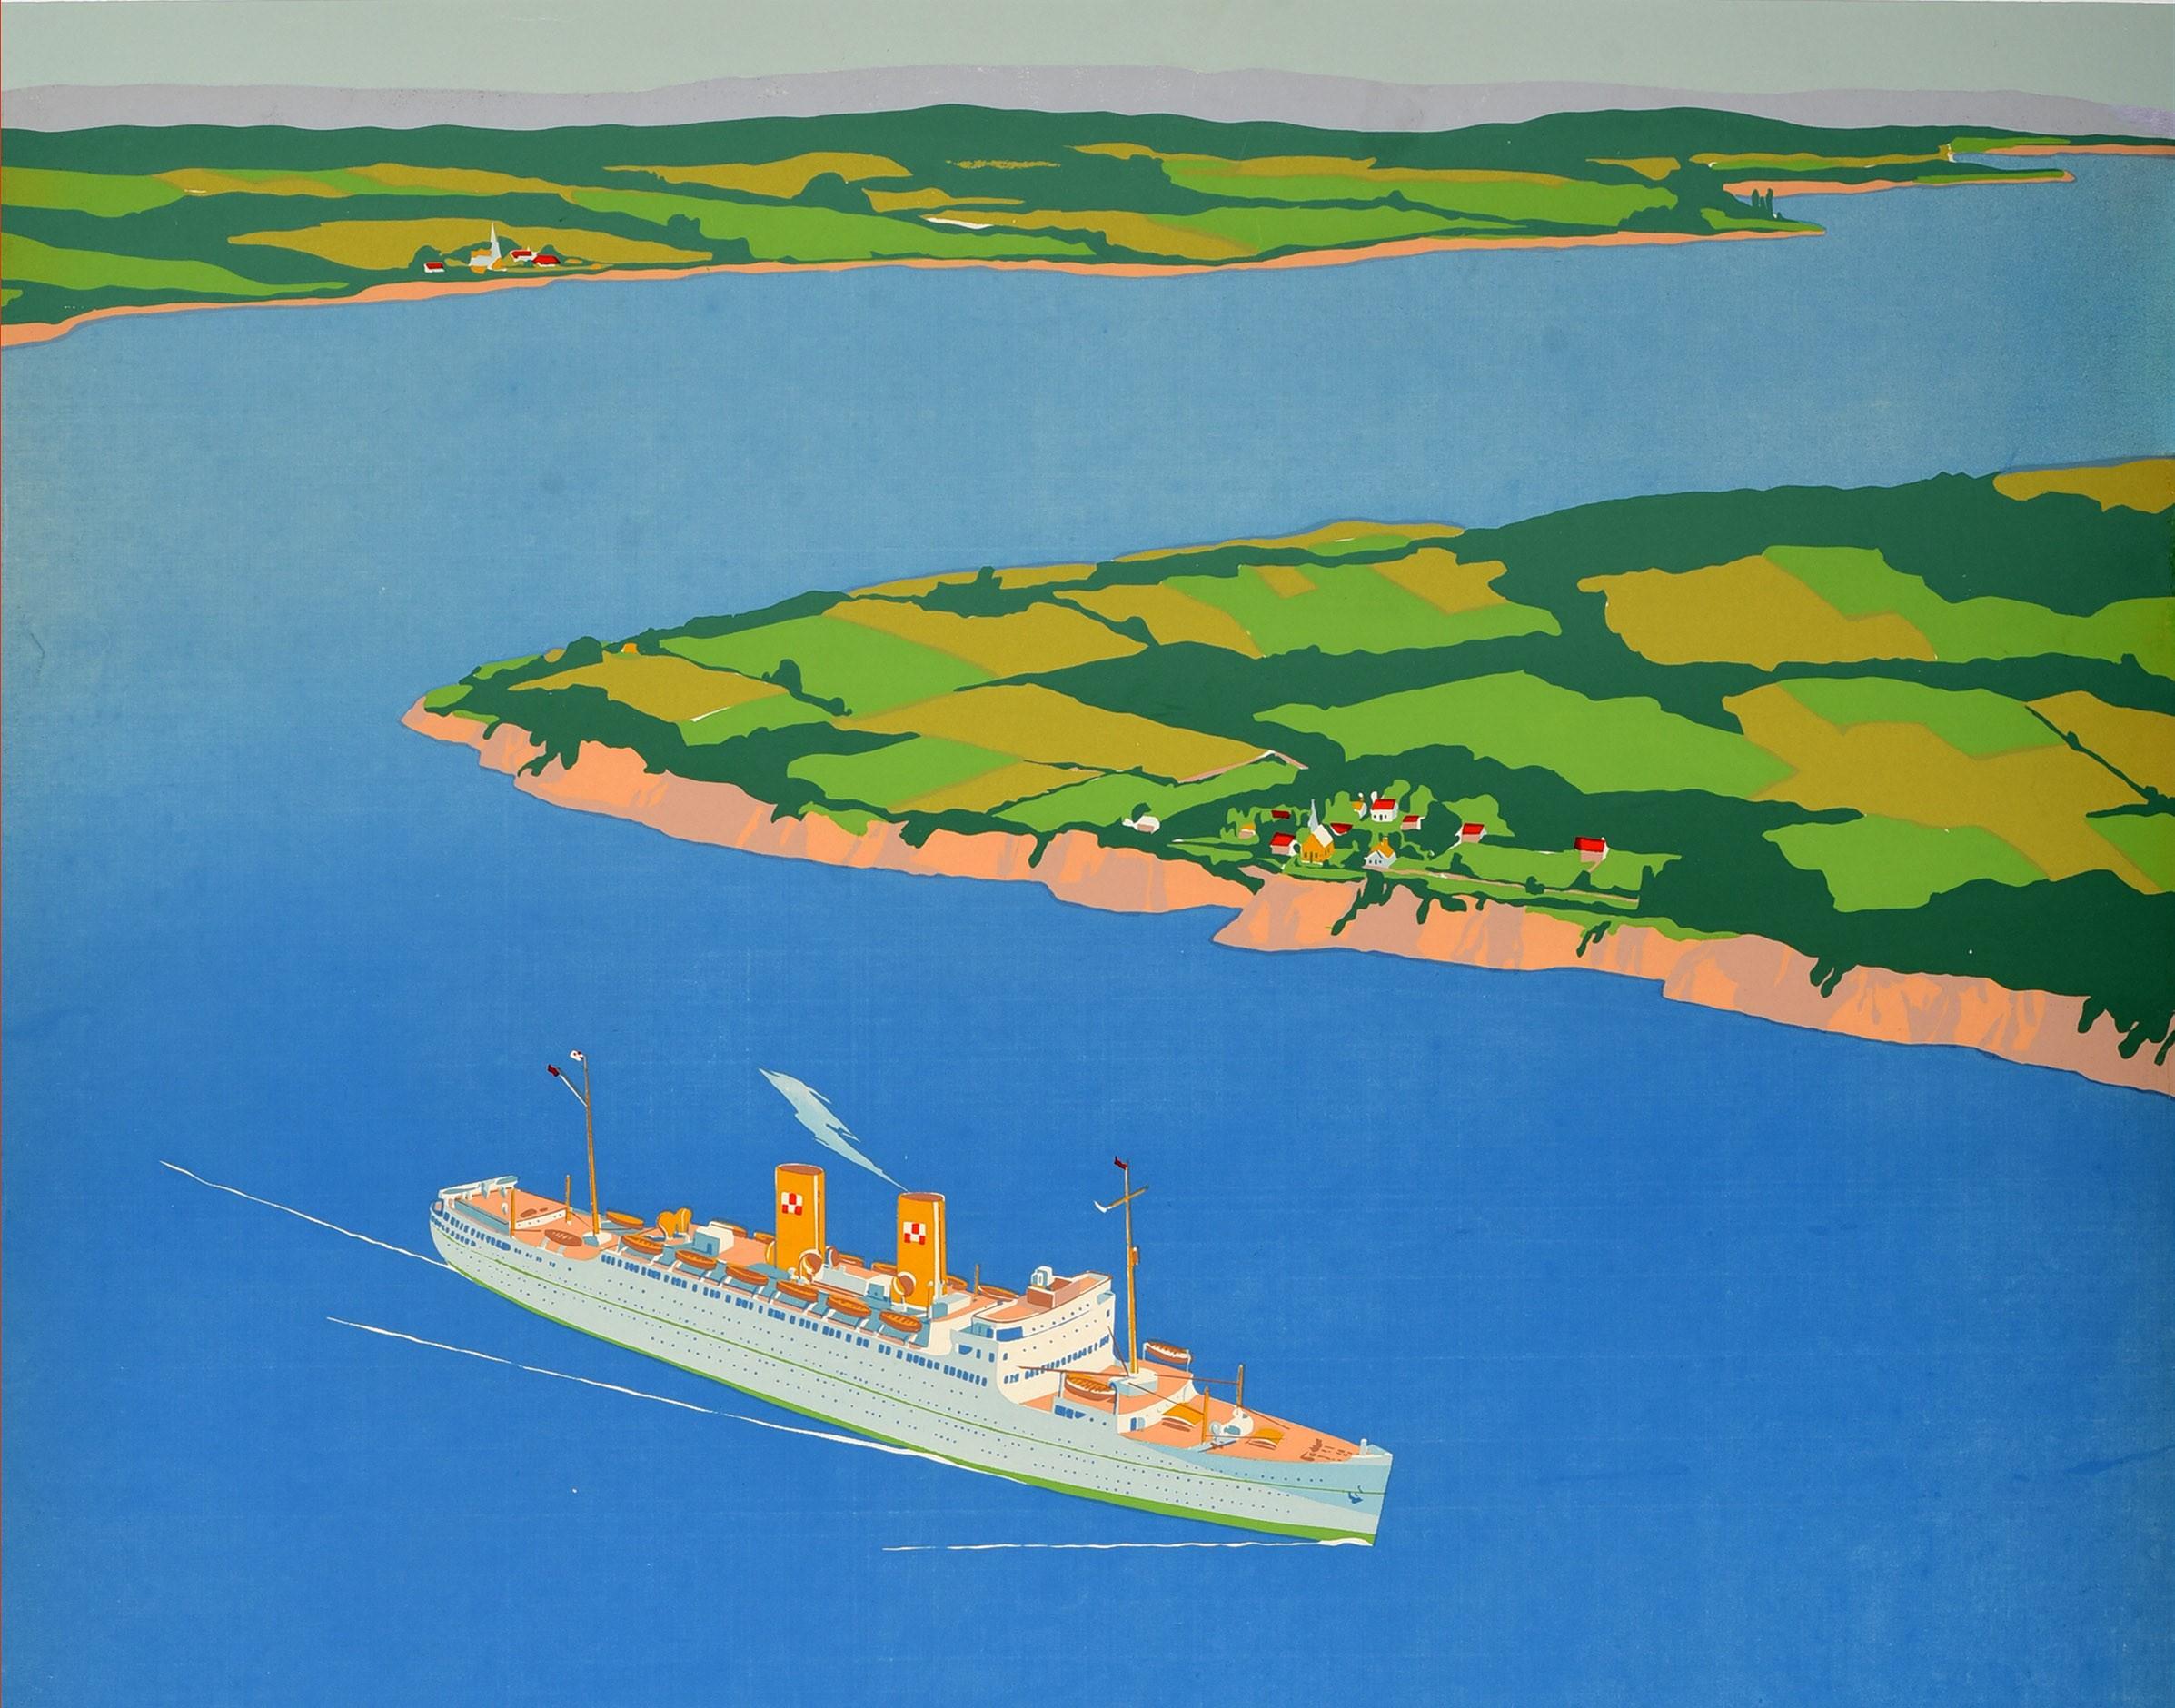 Original vintage cruise travel poster for The St Lawrence Route to Europe issued by Canadian Pacific featuring a great image viewed from above of an ocean liner sailing along a scenic river passing three sailing boats with villages, trees and fields